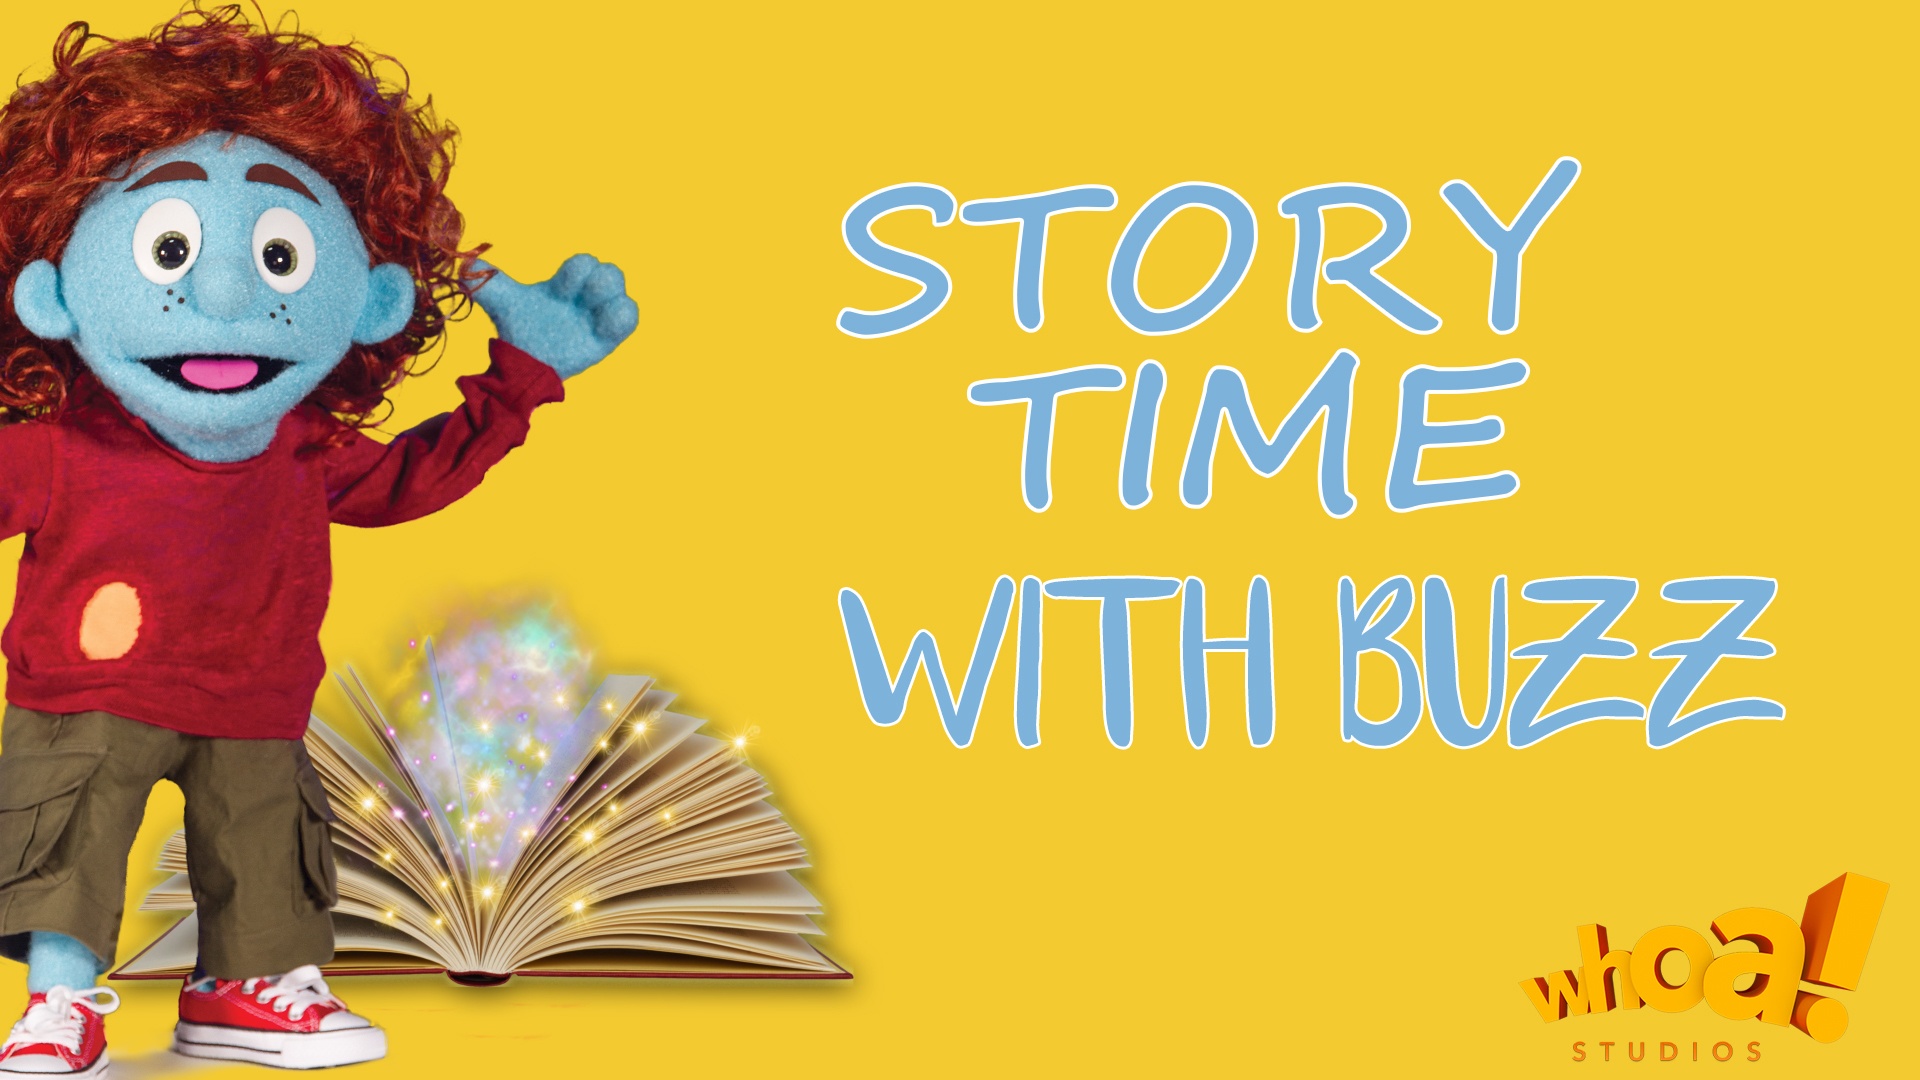 Story time with buzz board